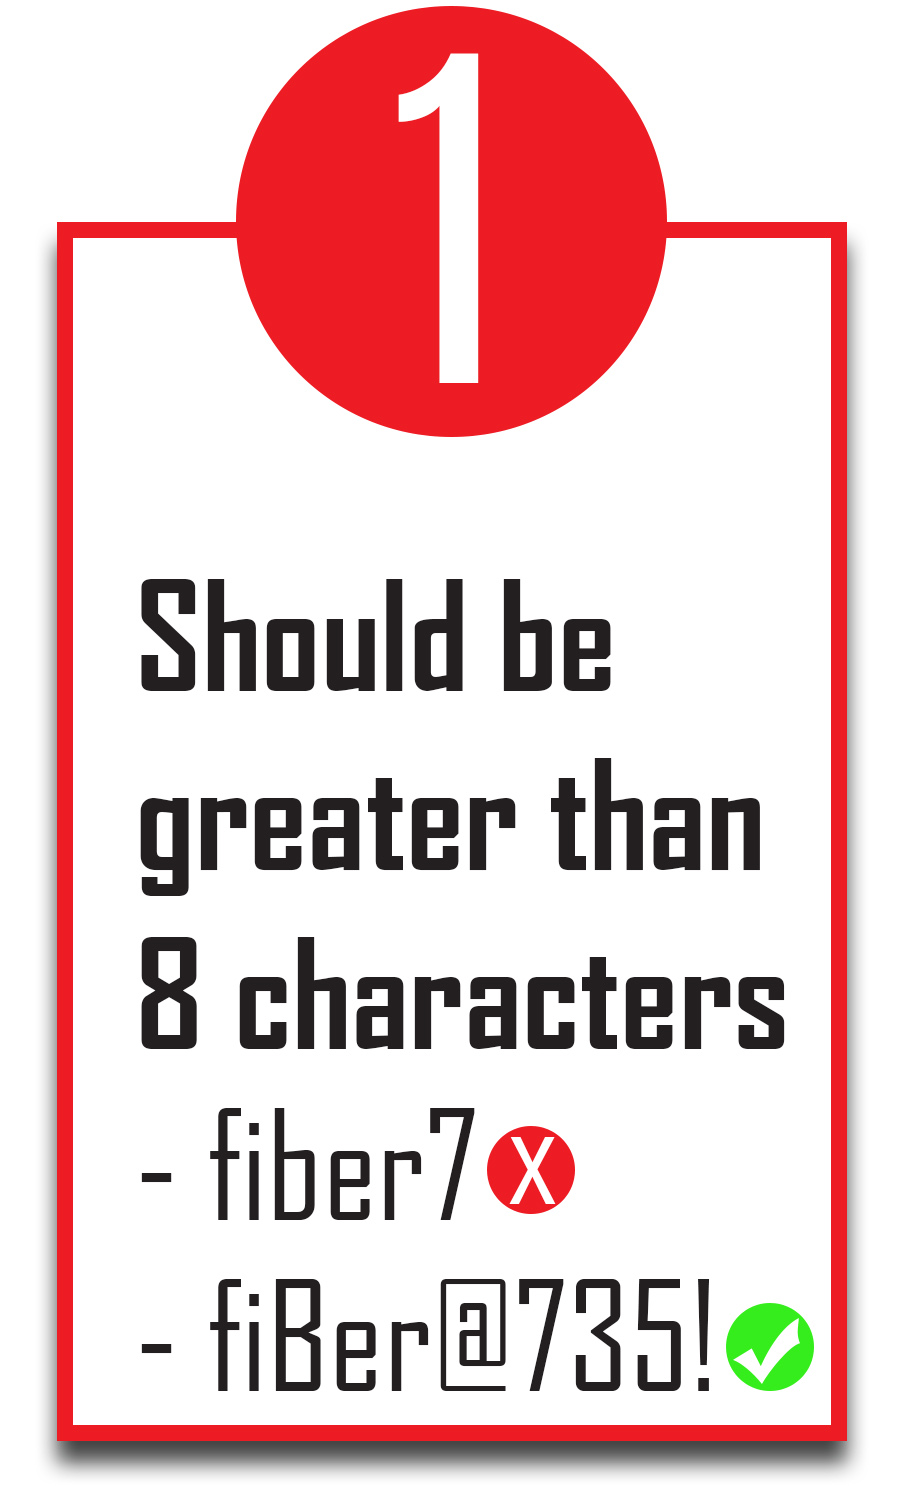 Should be greater than 8 characters.